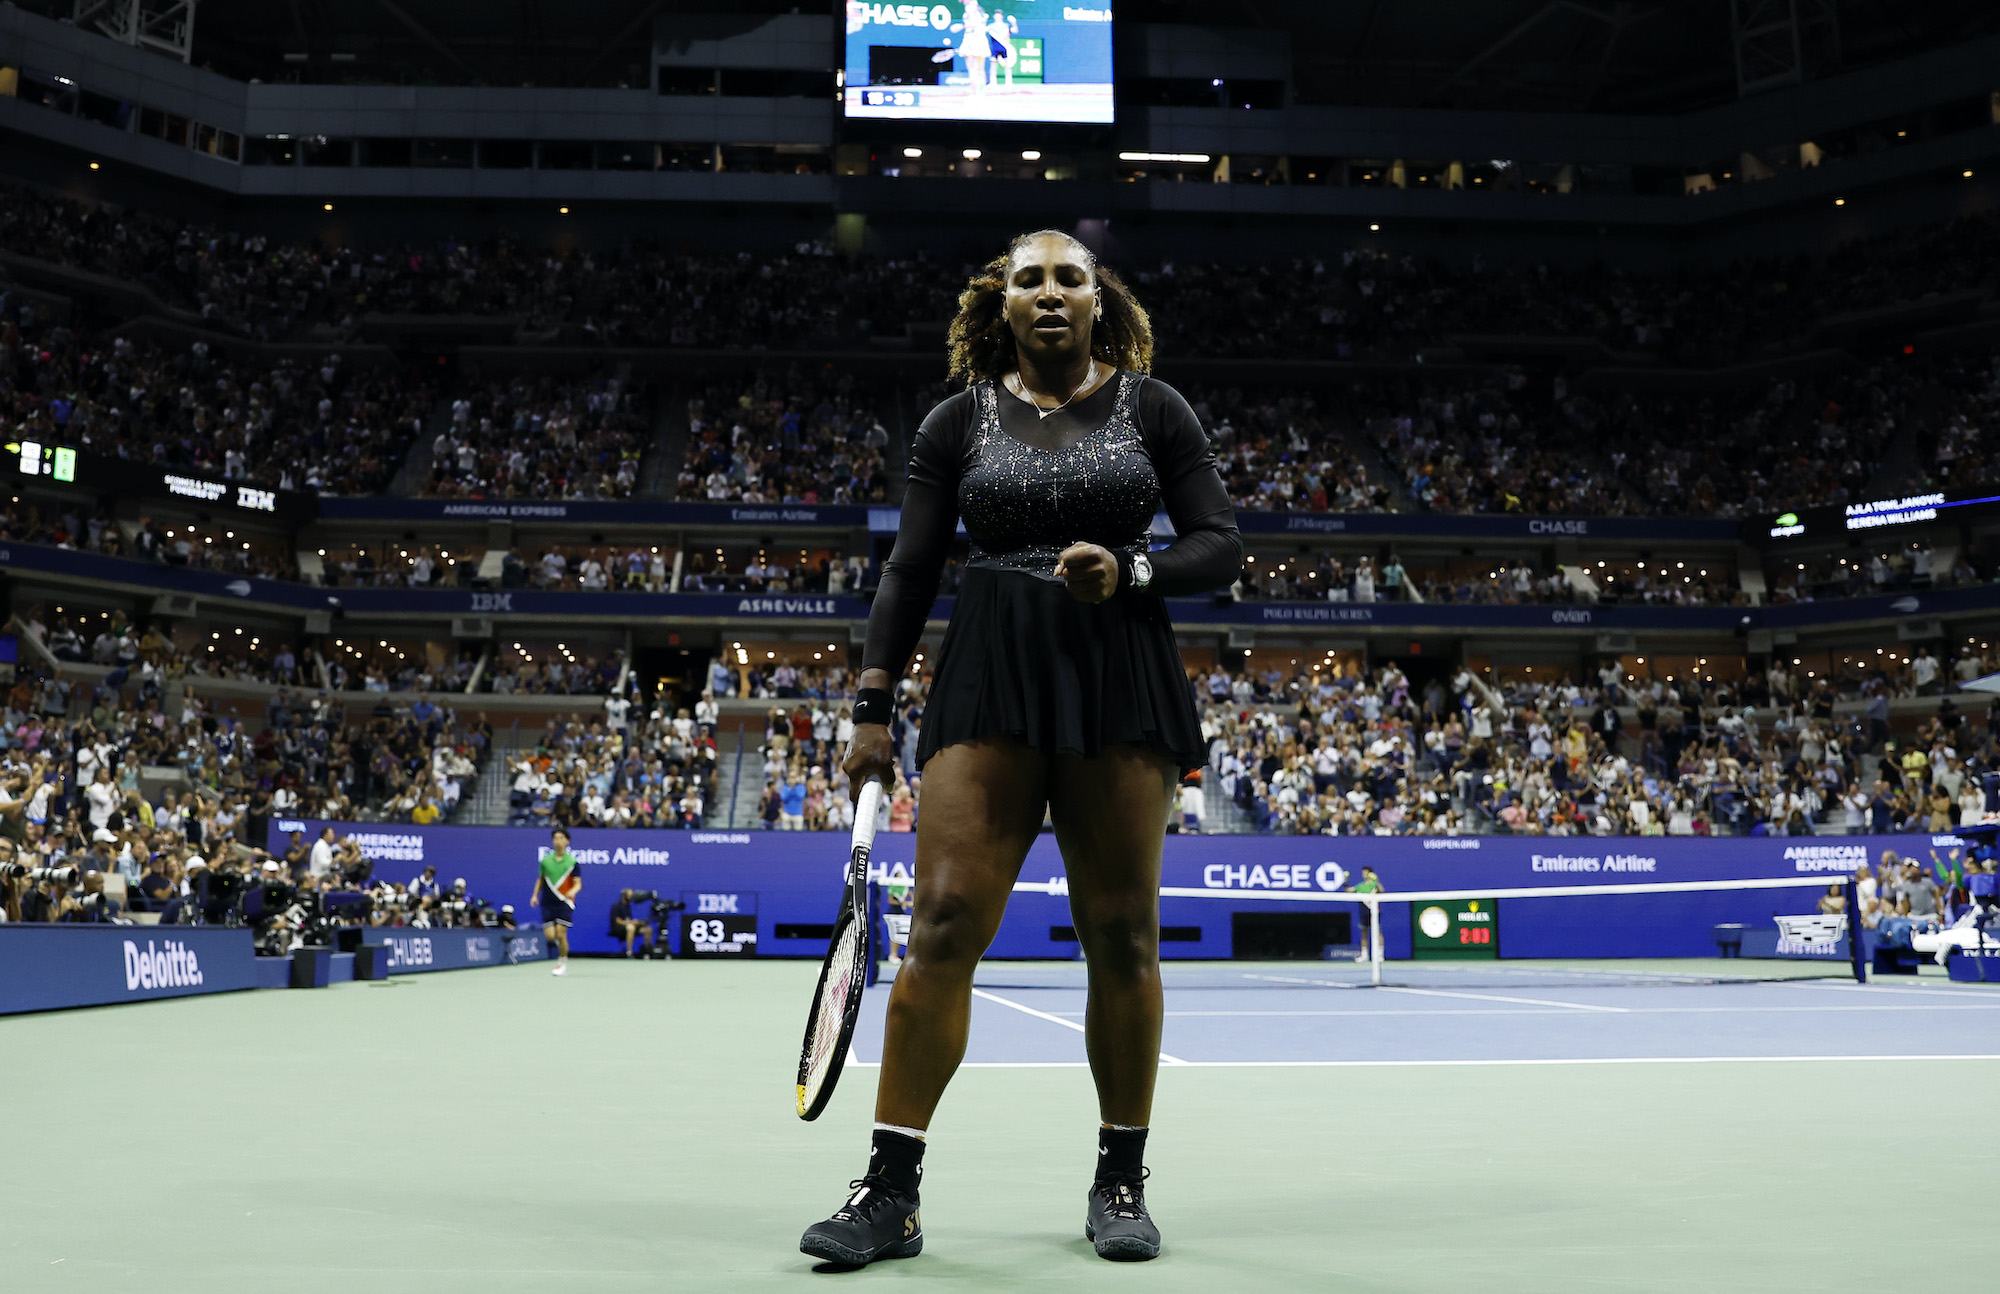 Serena Williams of the United States reacts in the third set against Ajla Tomlijanovic of Australia during their Women's Singles Third Round match on Day Five of the 2022 US Open at USTA Billie Jean King National Tennis Center on September 02, 2022.